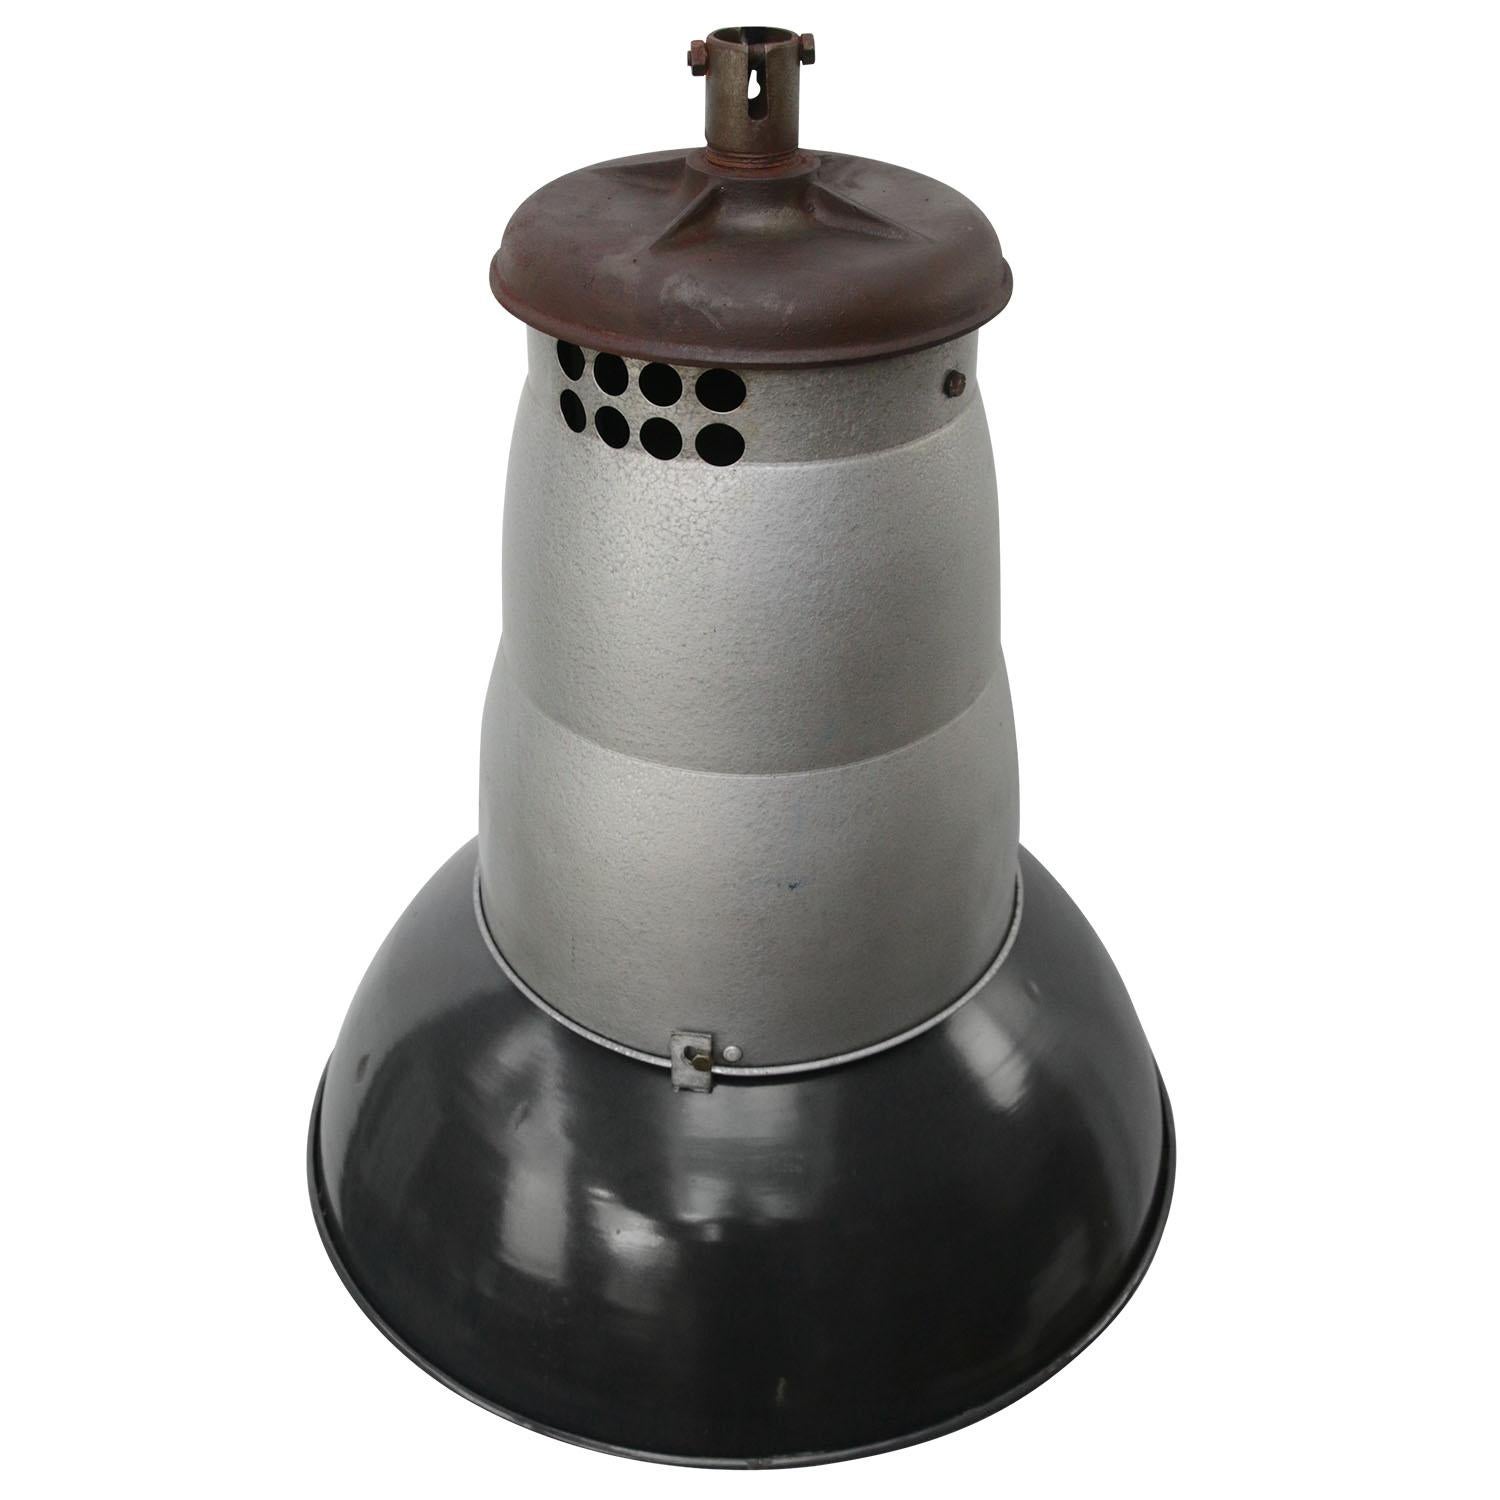 Industrial enamel pendant by Mazda, France
Black enamel shade, metal middle part with cast iron top

Weight: 6.40 kg / 14.1 lb

Priced per individual item. All lamps have been made suitable by international standards for incandescent light